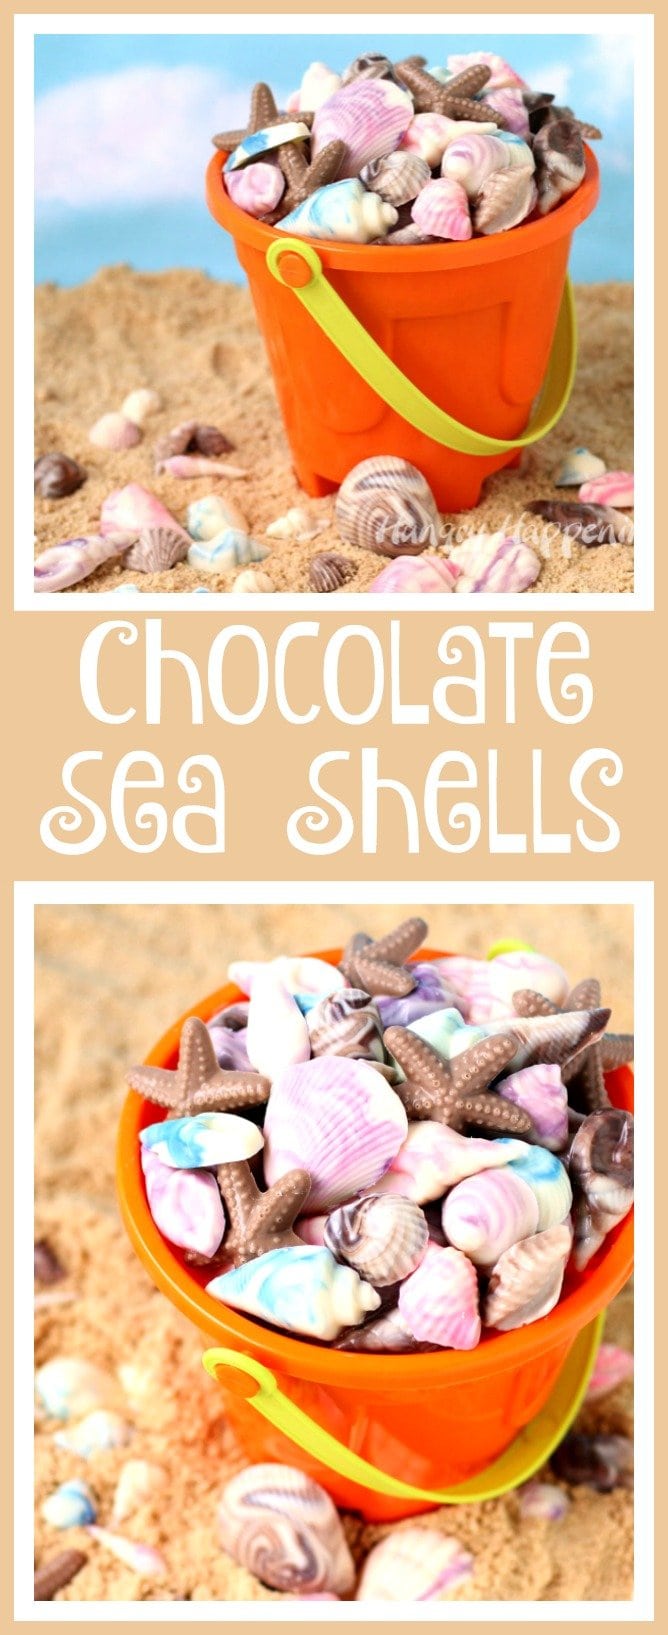 Swirl colored chocolate together to create beautiful Chocolate Sea Shells. See the step-by-step tutorial at HungryHappenings.com.